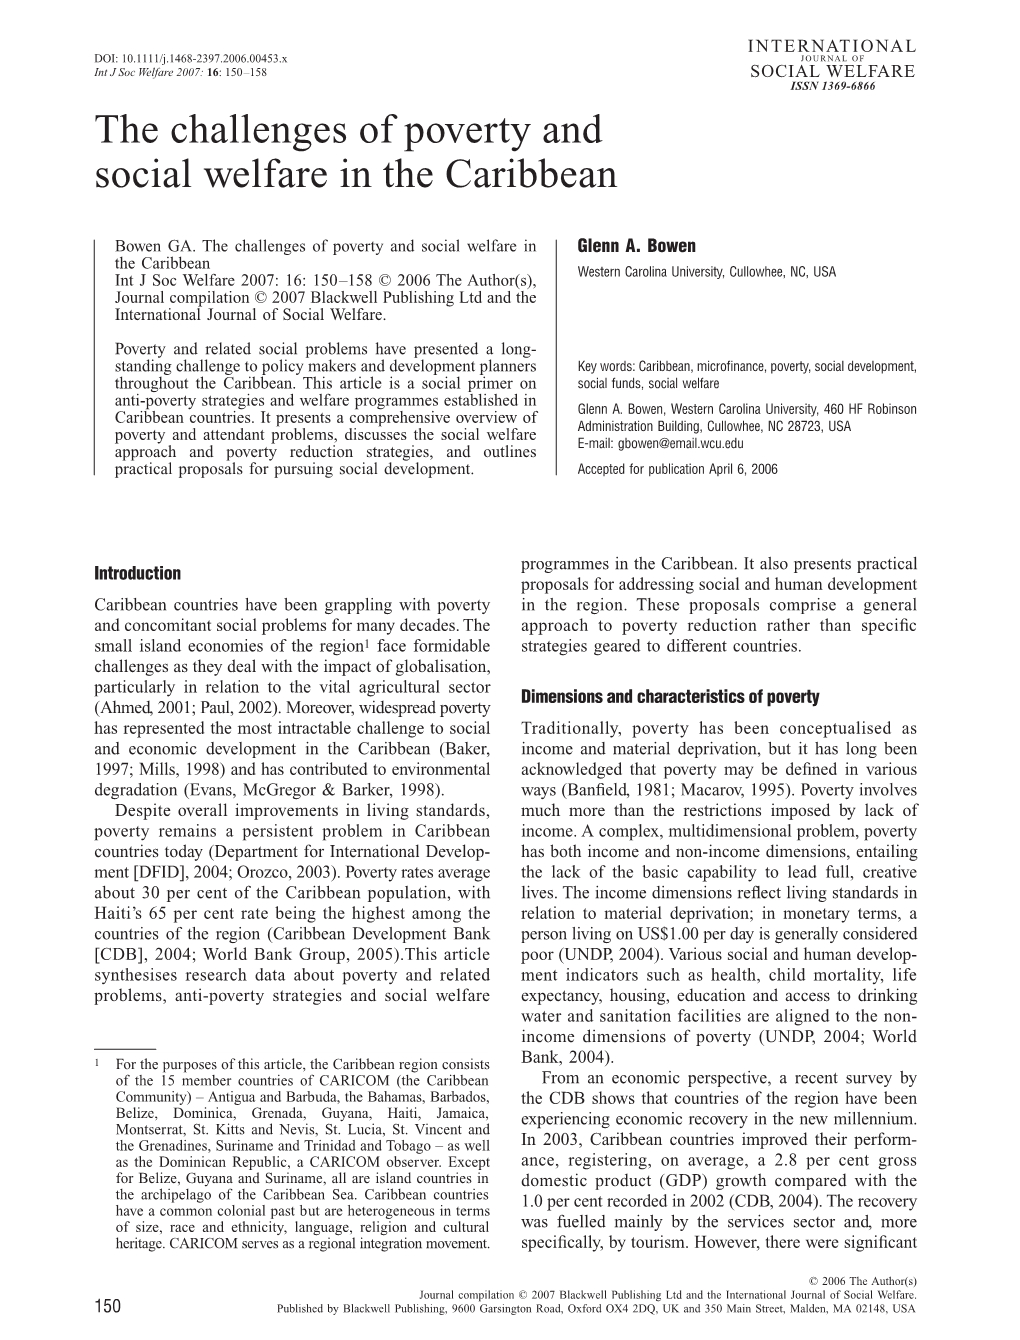 The Challenges of Poverty and Social Welfare in the Caribbean